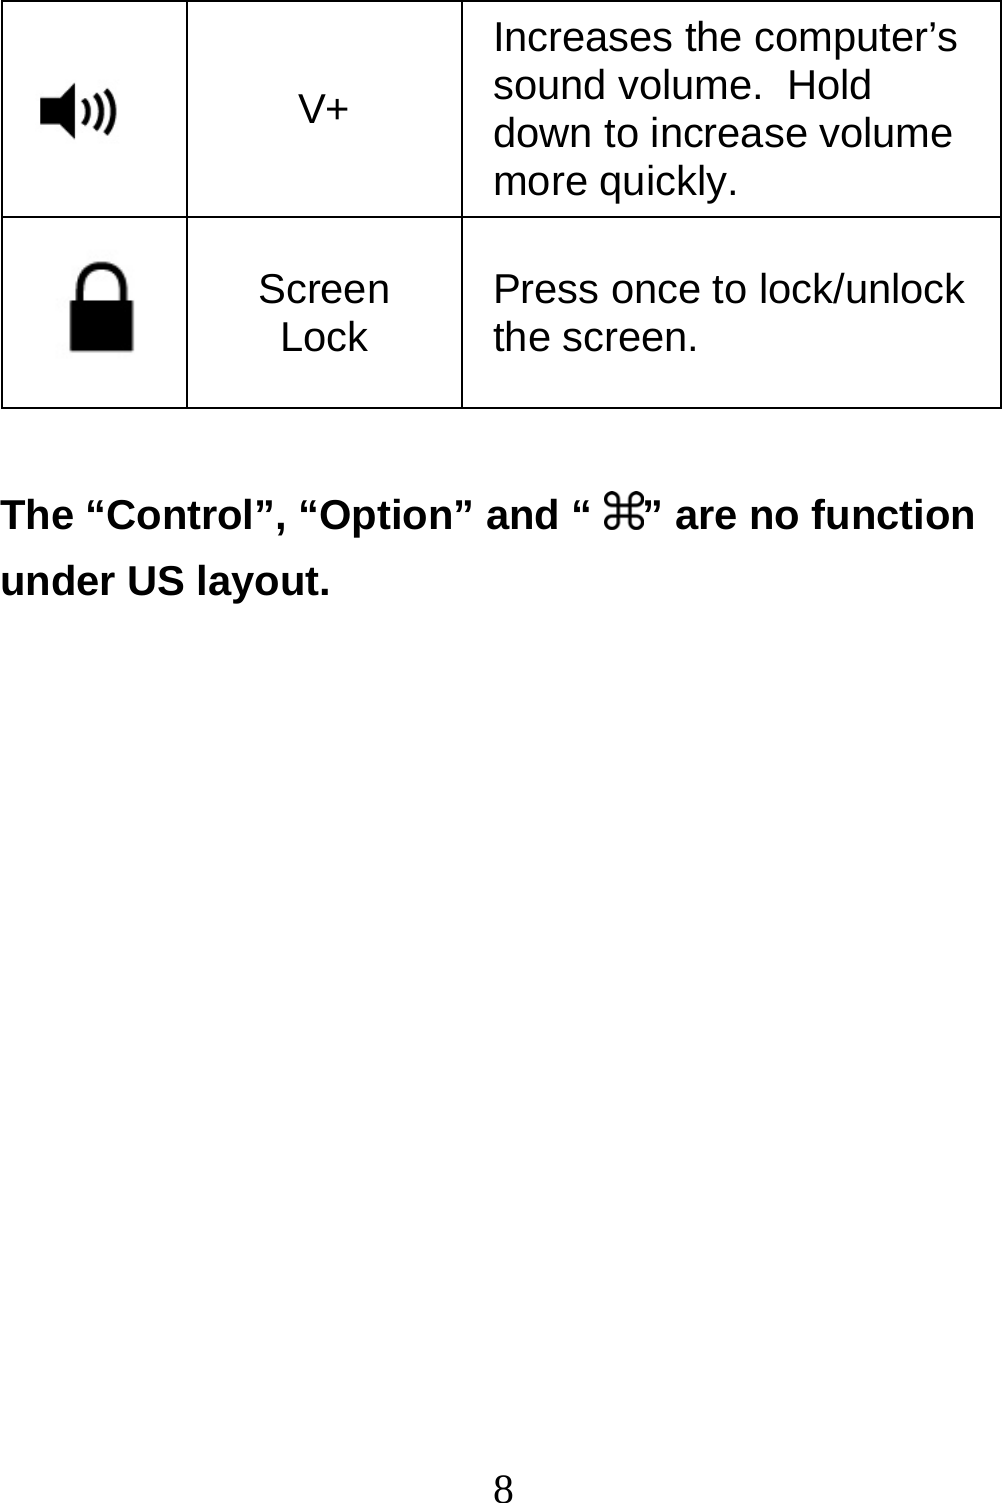  8 V+ Increases the computer’s sound volume.  Hold down to increase volume more quickly.  Screen Lock  Press once to lock/unlock the screen.  The “Control”, “Option” and “  ” are no function under US layout.             